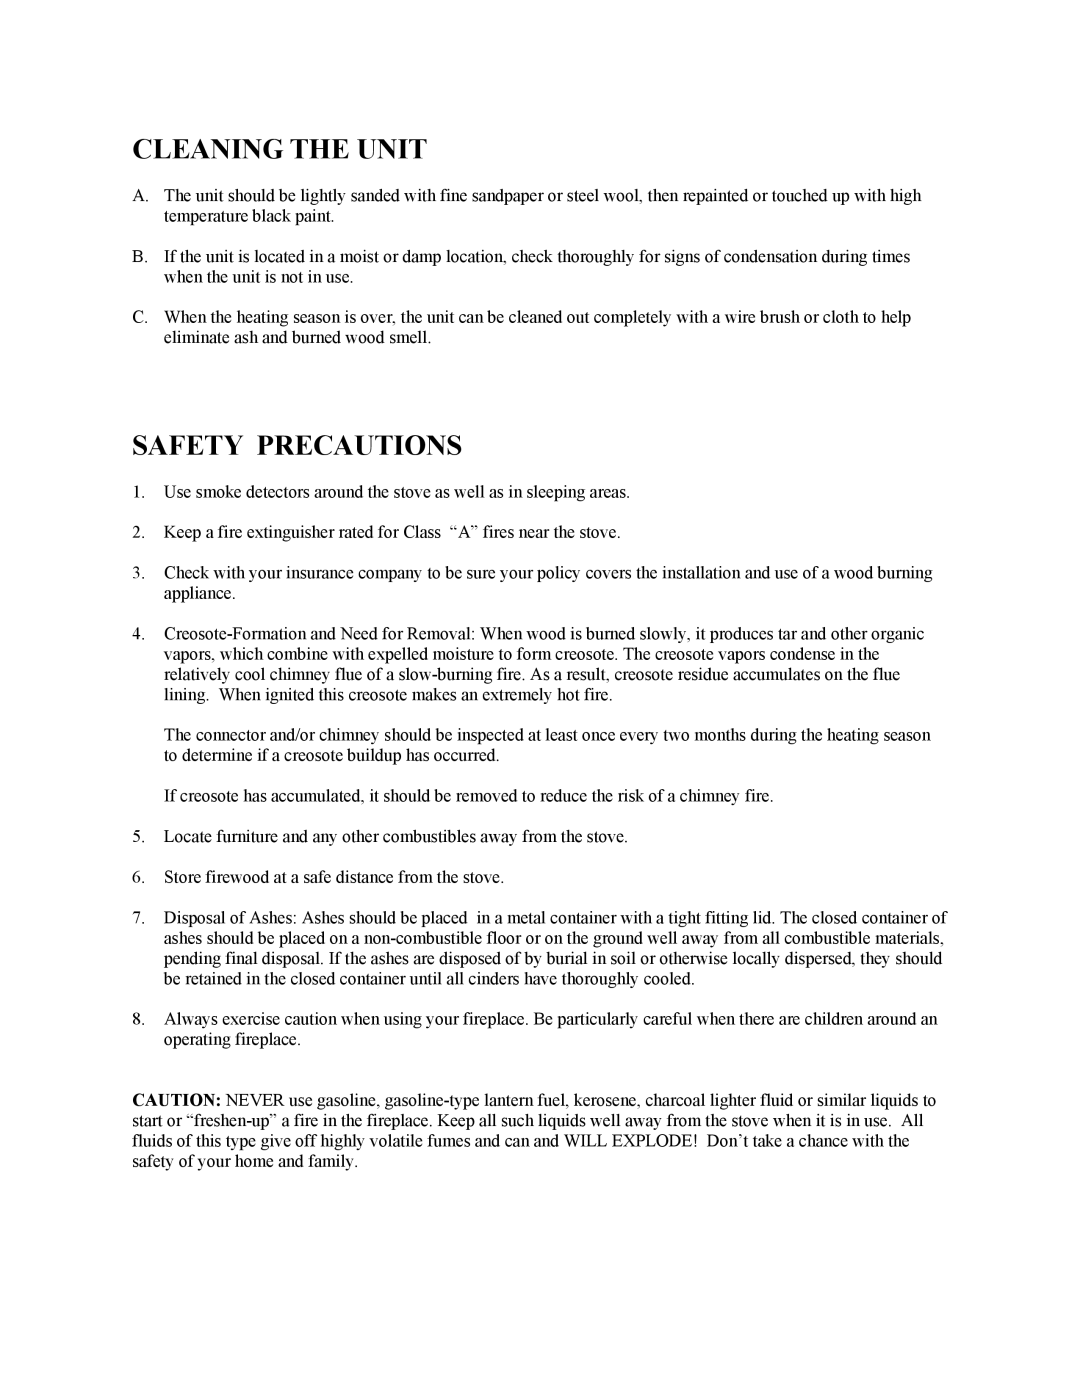 New Buck Corporation 20 Room Heater manual Cleaning The Unit, Safety Precautions 